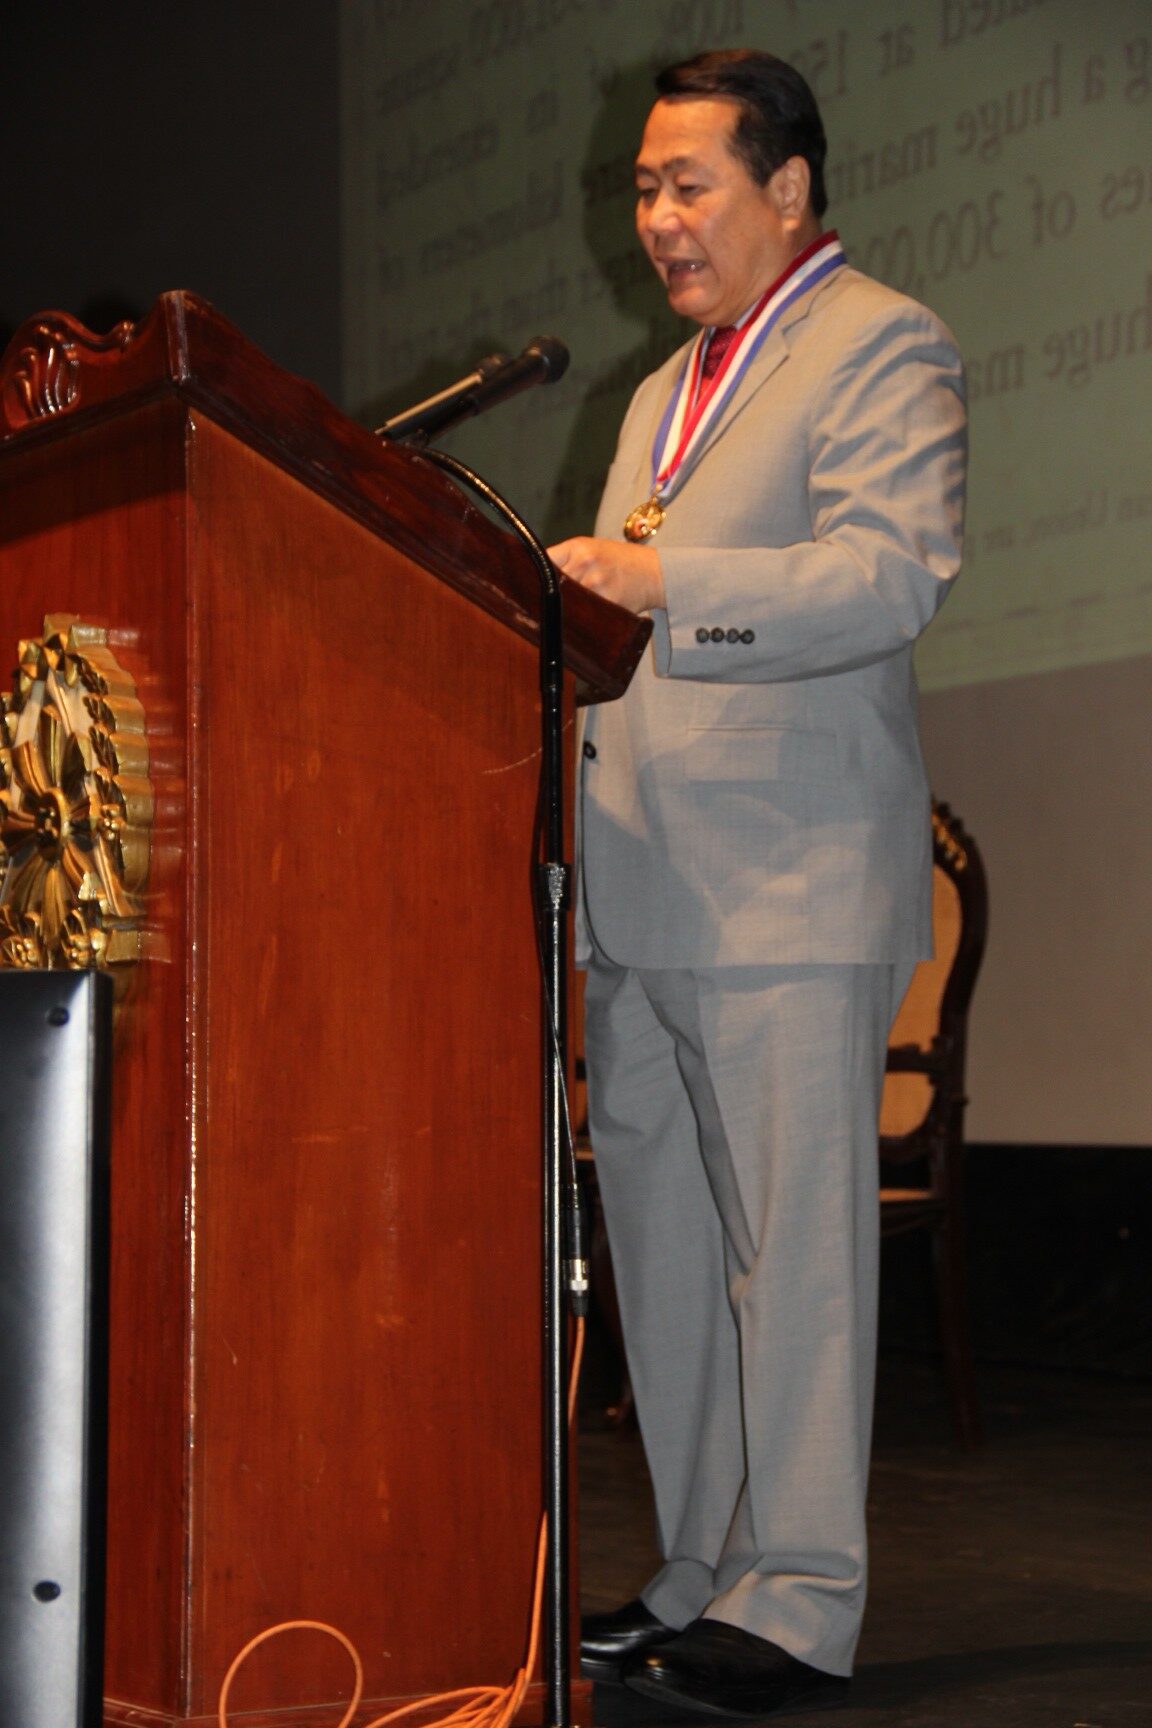 Lecture delivered by Associate Justice Antonio T. Carpio before the Philippine Military Academy Alumni Association, AFP Theater, Camp General Emilio Aguinaldo, Quezon City, 23 January 2016.